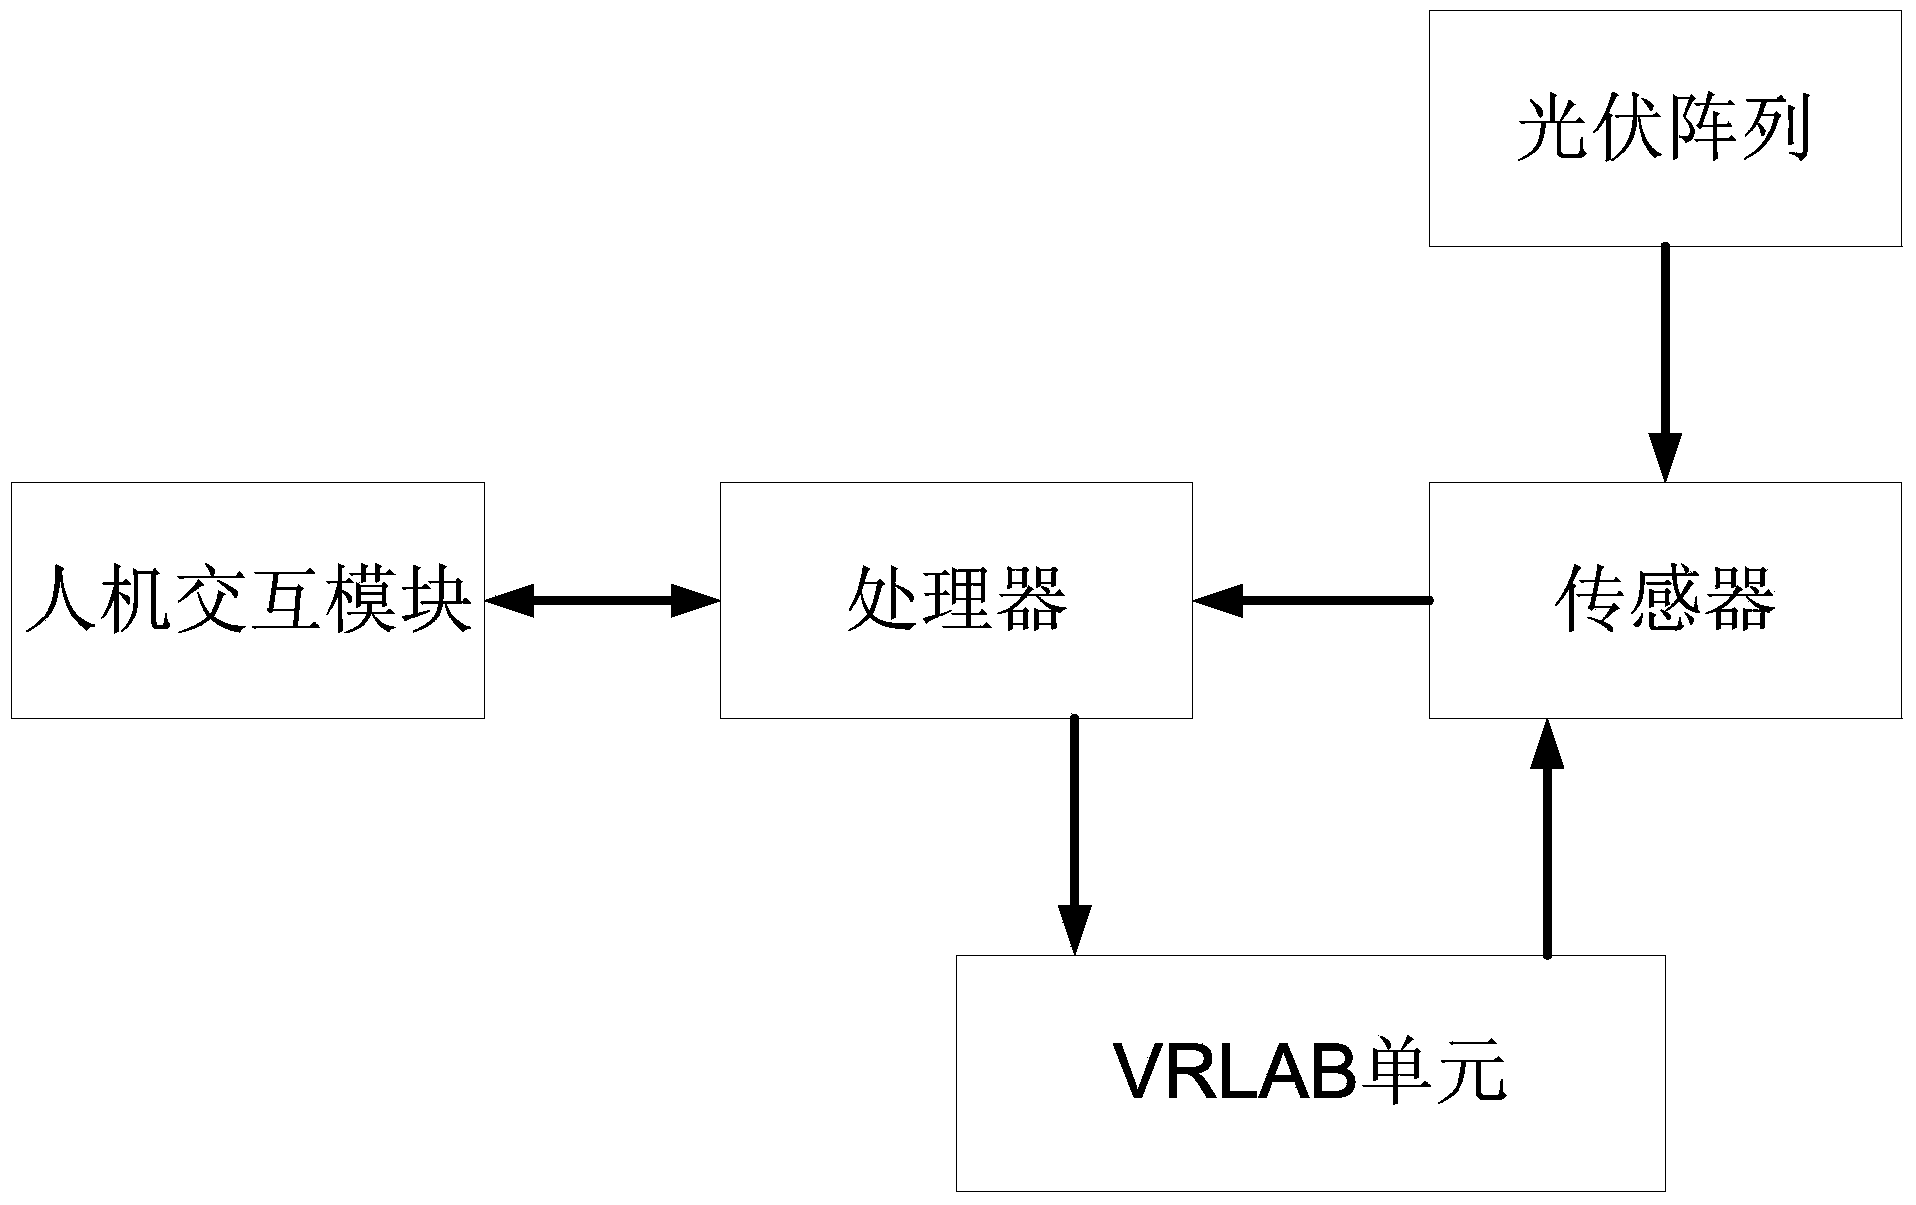 Off-grid photovoltaic VRLAB (Valve Regulated Lead Acid Battery) energy storage control device and working method thereof